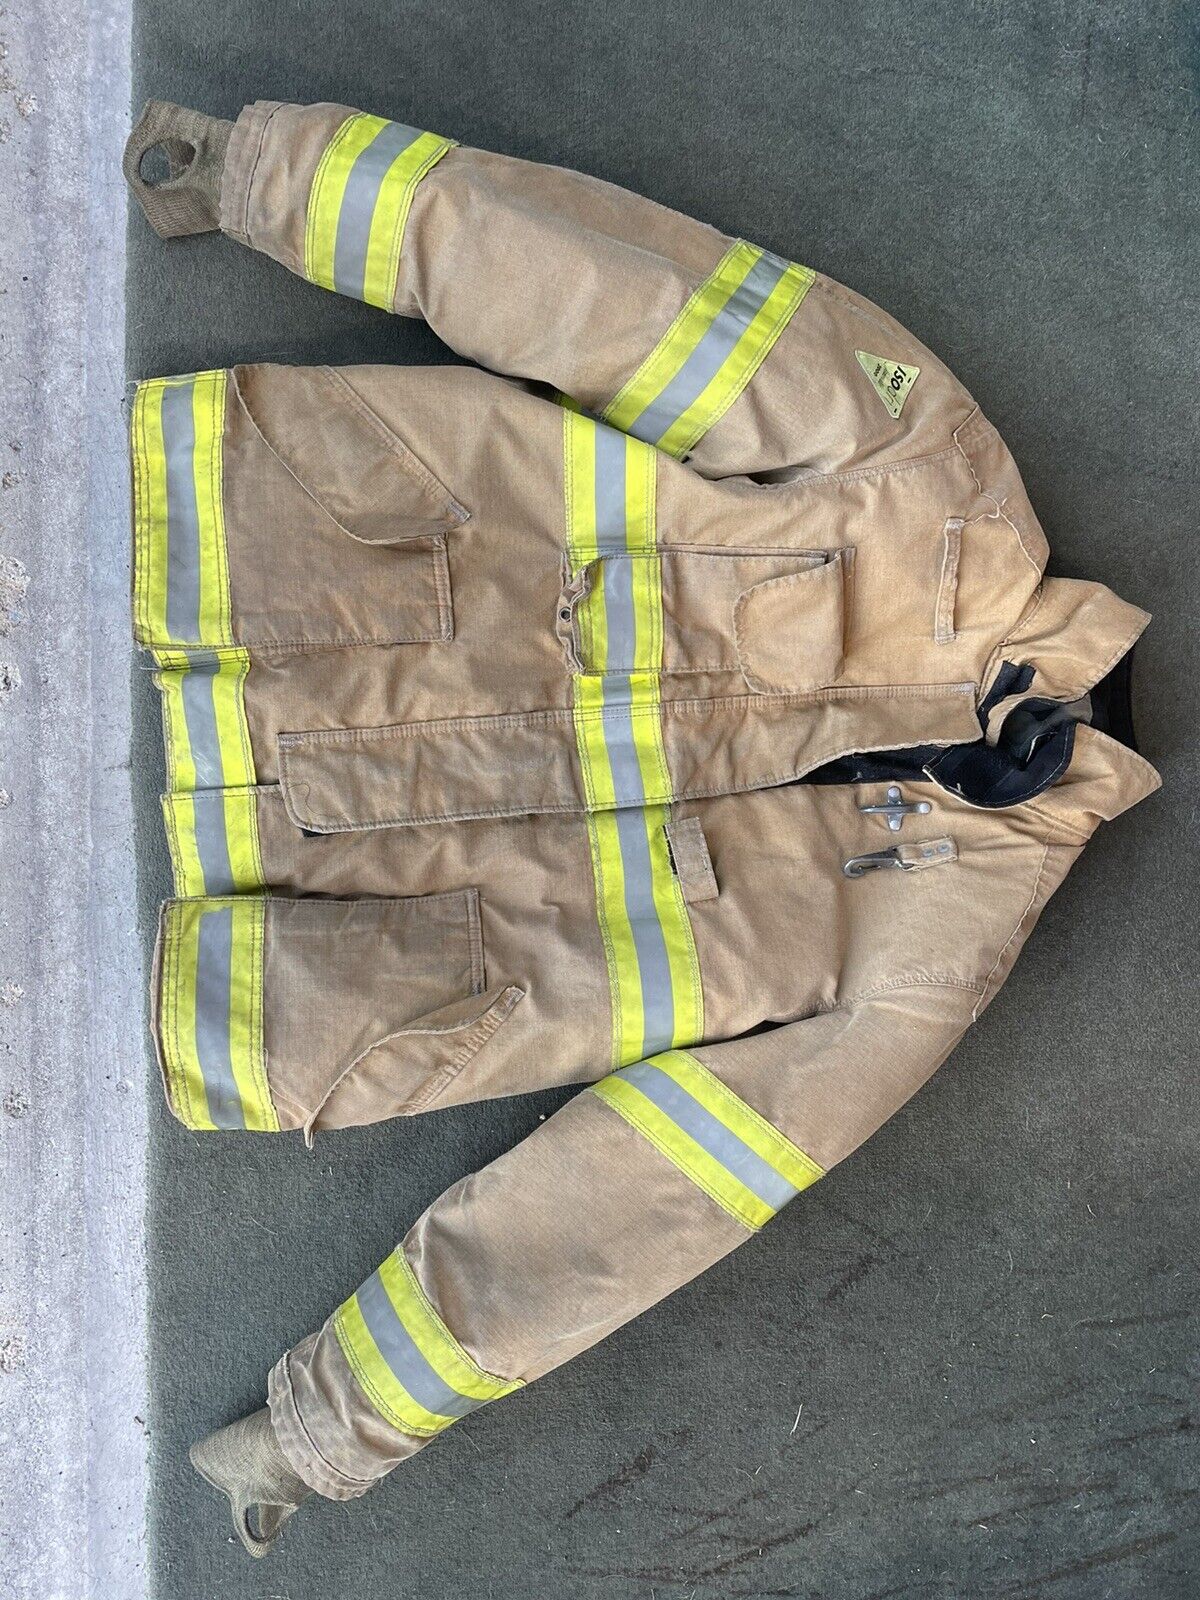 Janesville Structural Firefighting Coat